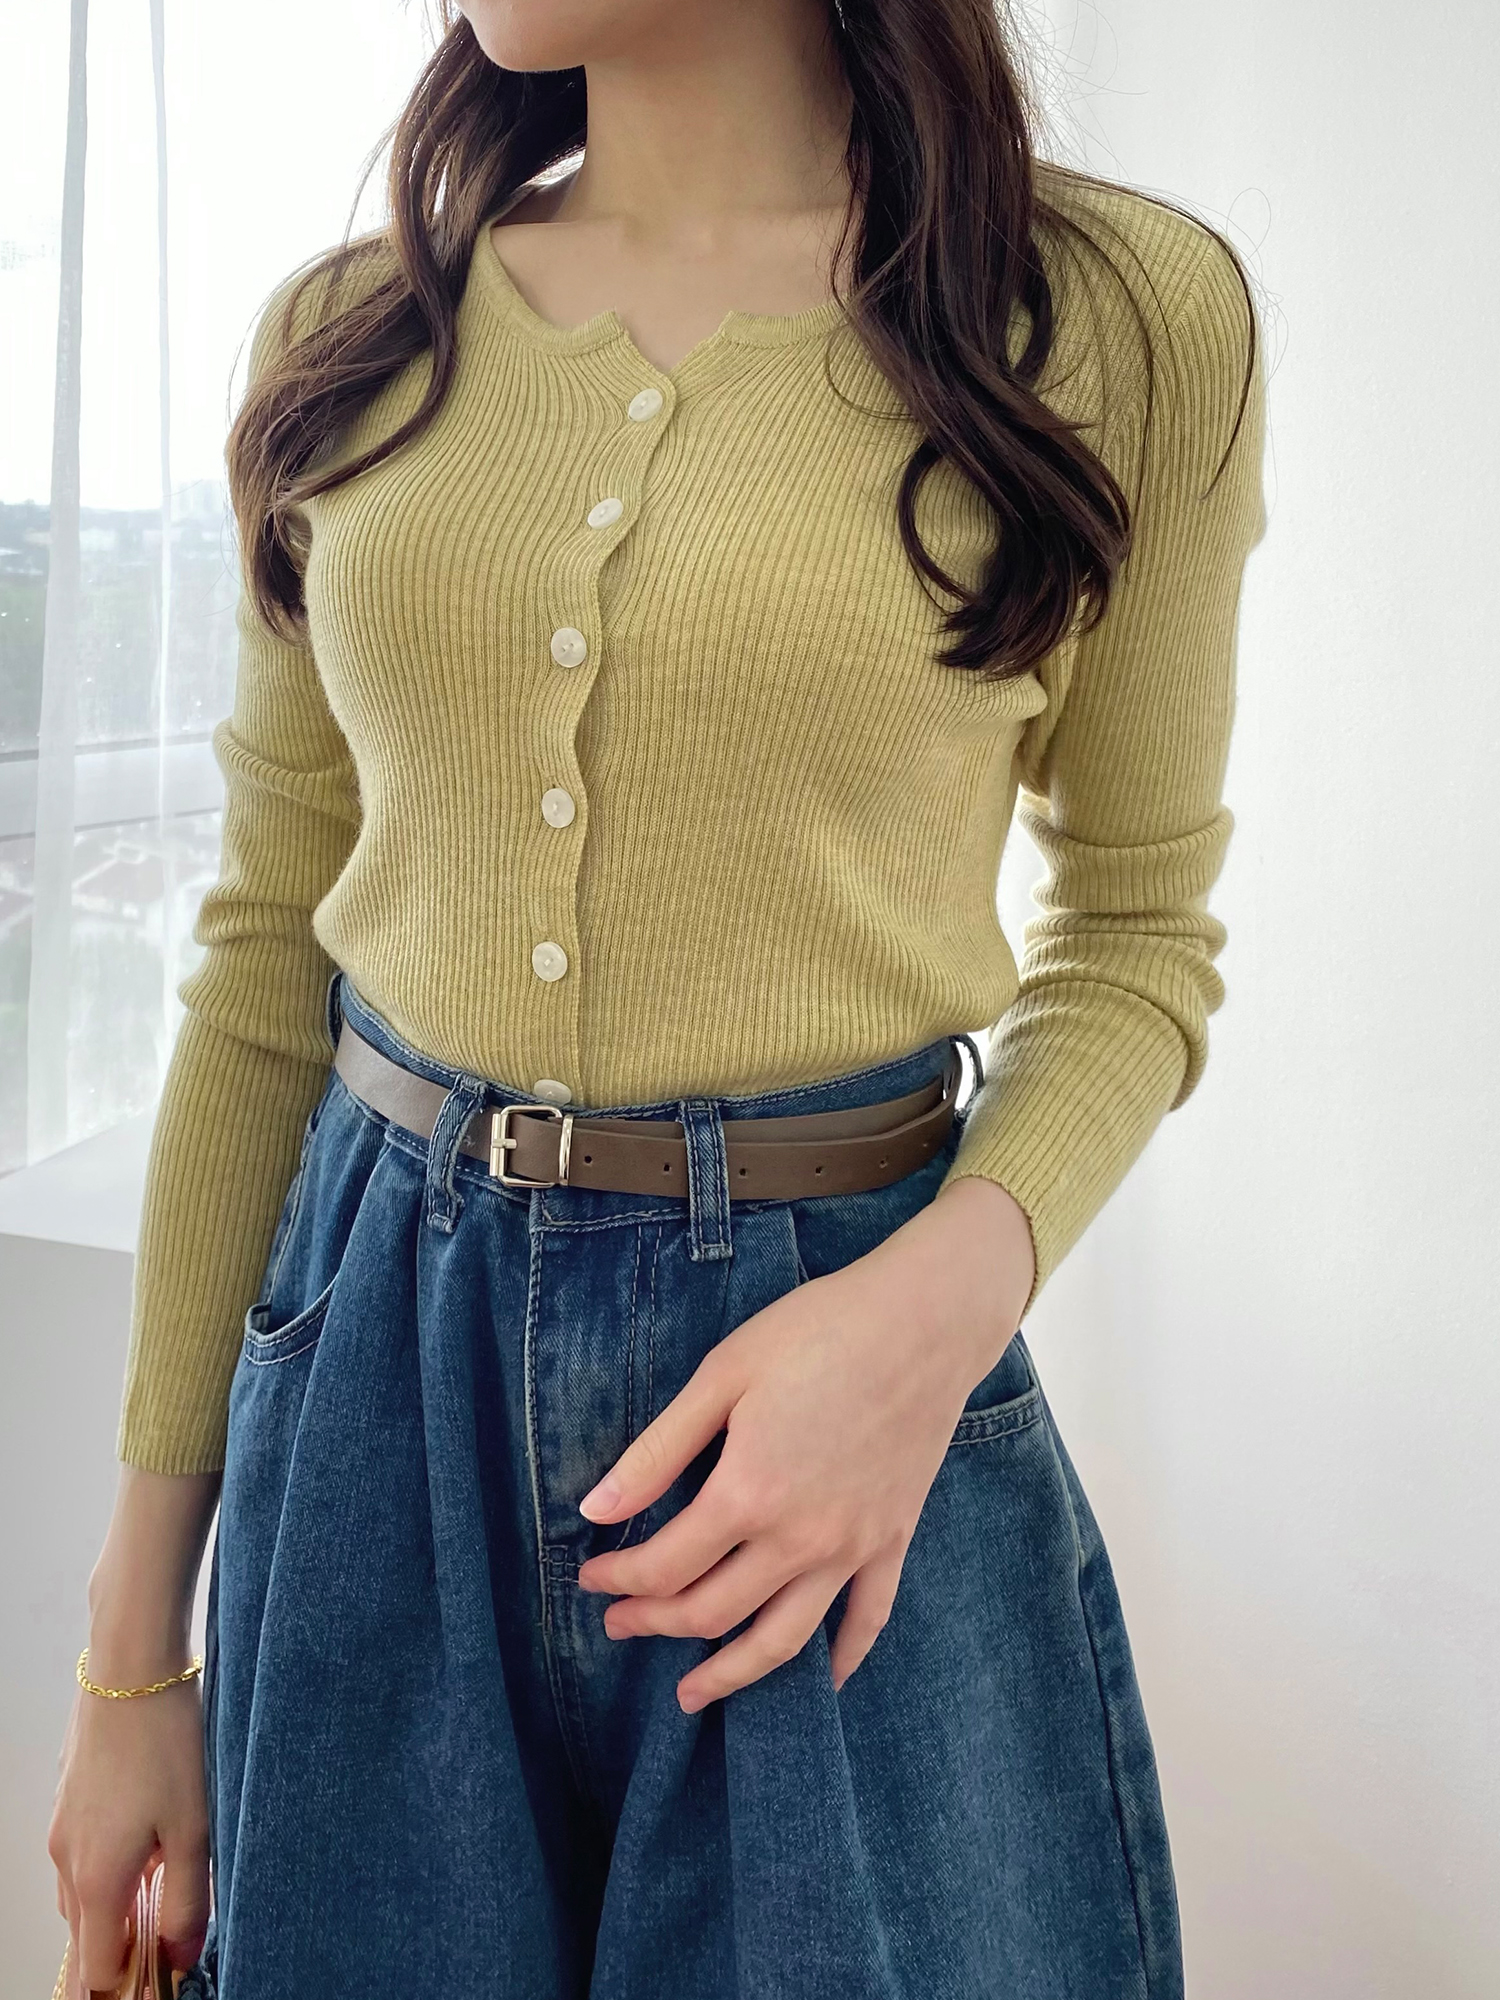 20221208 Cardigan Outer Blouse Top Knit_3